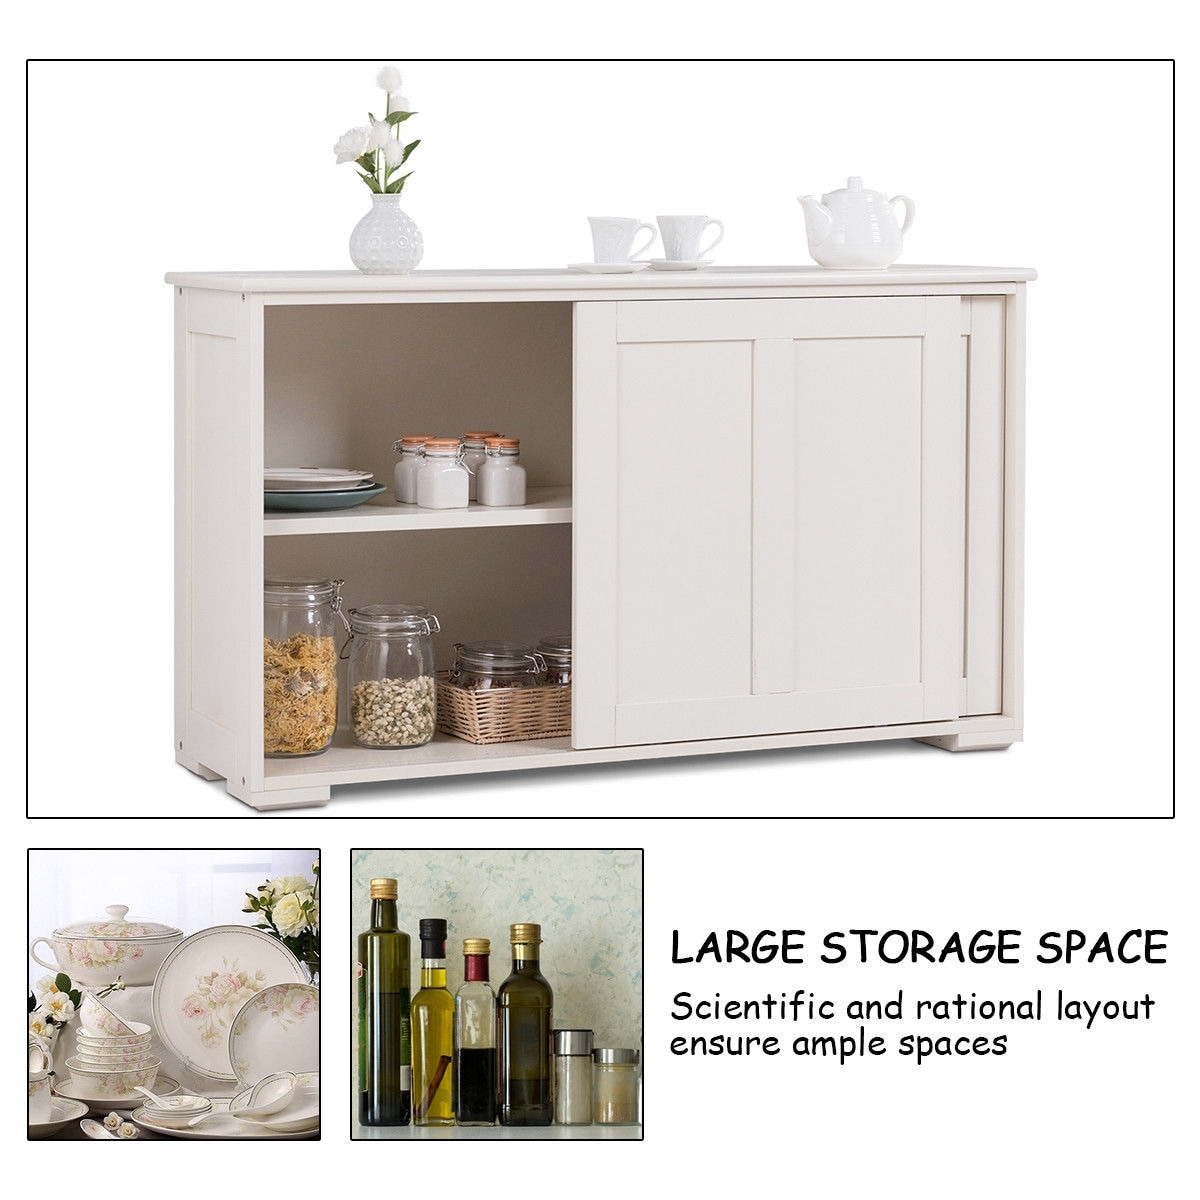 https://ak1.ostkcdn.com/images/products/is/images/direct/8e652321758f86d23ee74cfe7b00d8b9c0e329c7/Costway-Kitchen-Storage-Cabinet-Sideboard-Buffet-Cupboard-Wood-Sliding-Door-Pantry-White.jpg